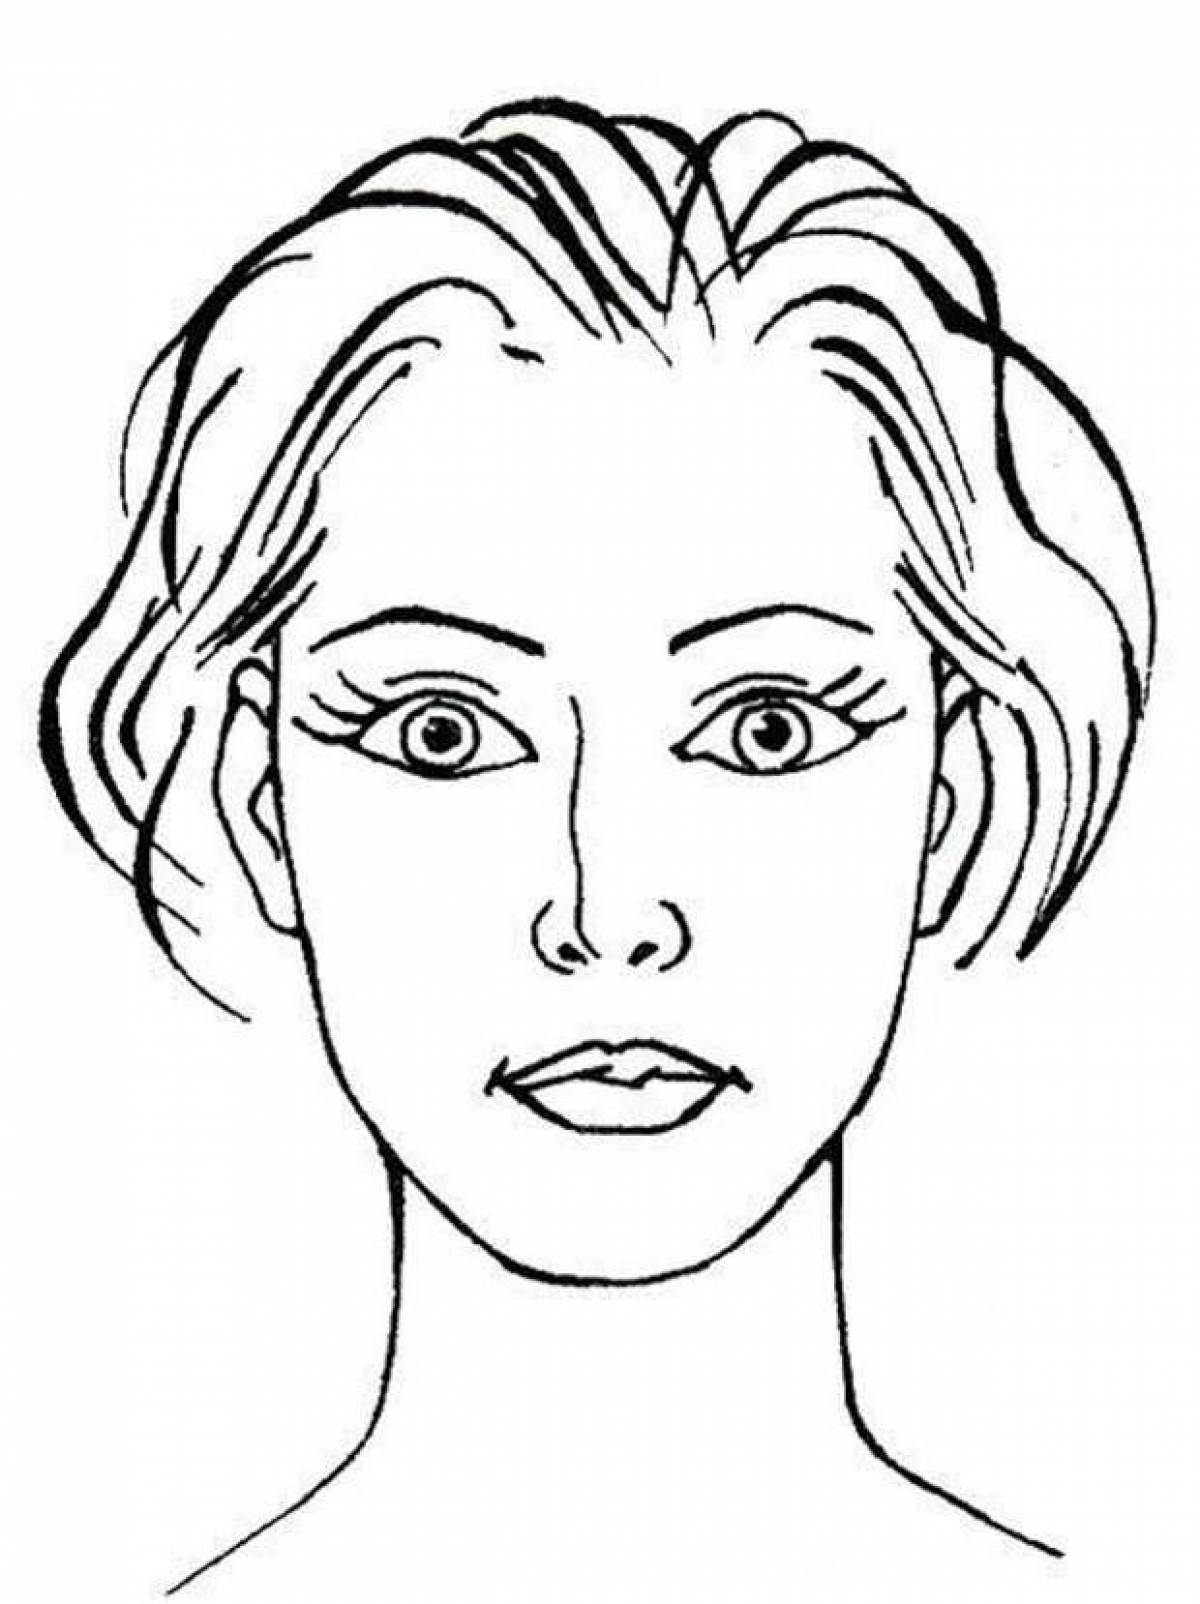 Colorful human face coloring page